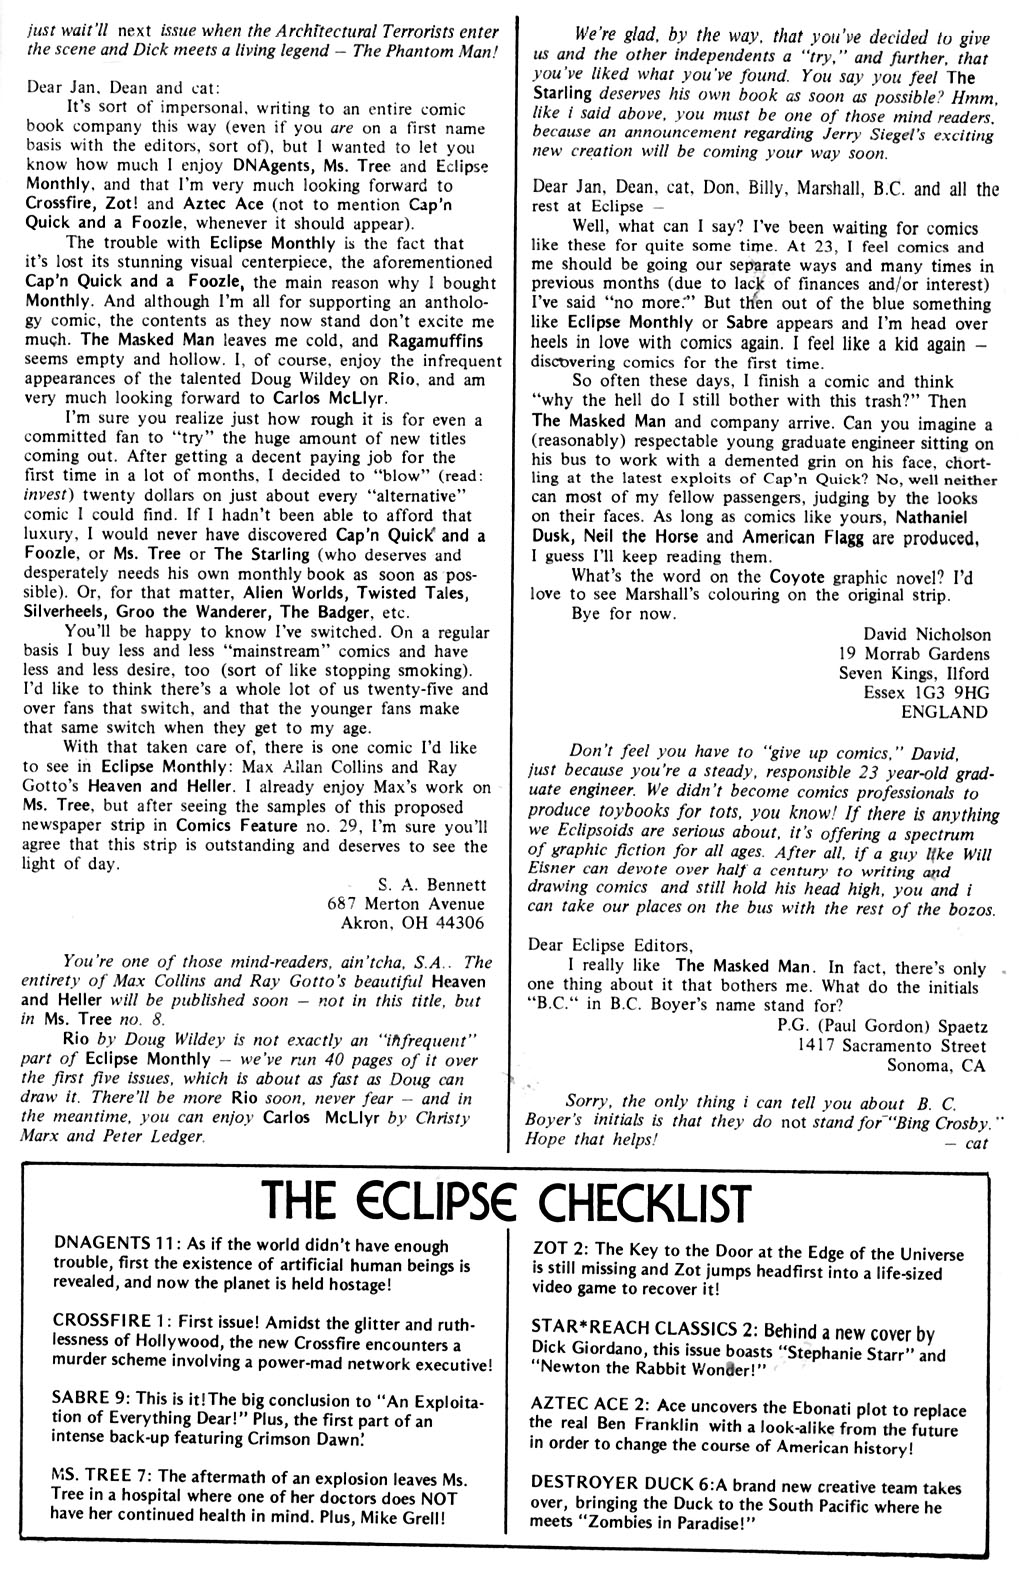 Read online Eclipse Monthly comic -  Issue #7 - 32